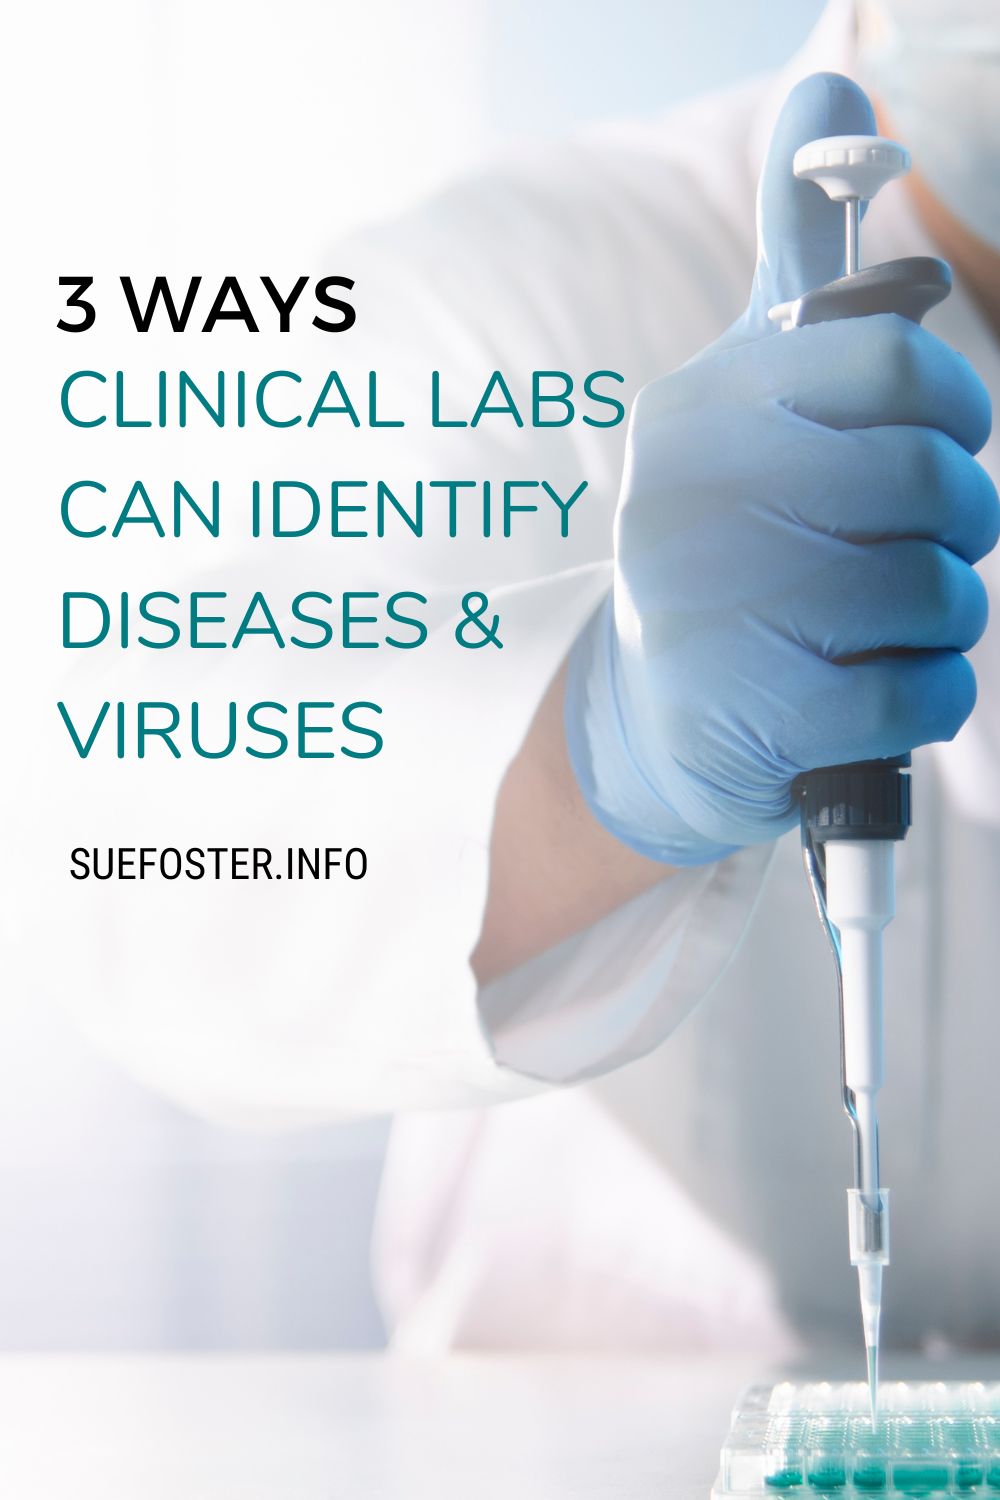 As a clinical lab, it is important for you to be able to diagnose diseases and viruses accurately. Read on to learn three tips on how you can do that.